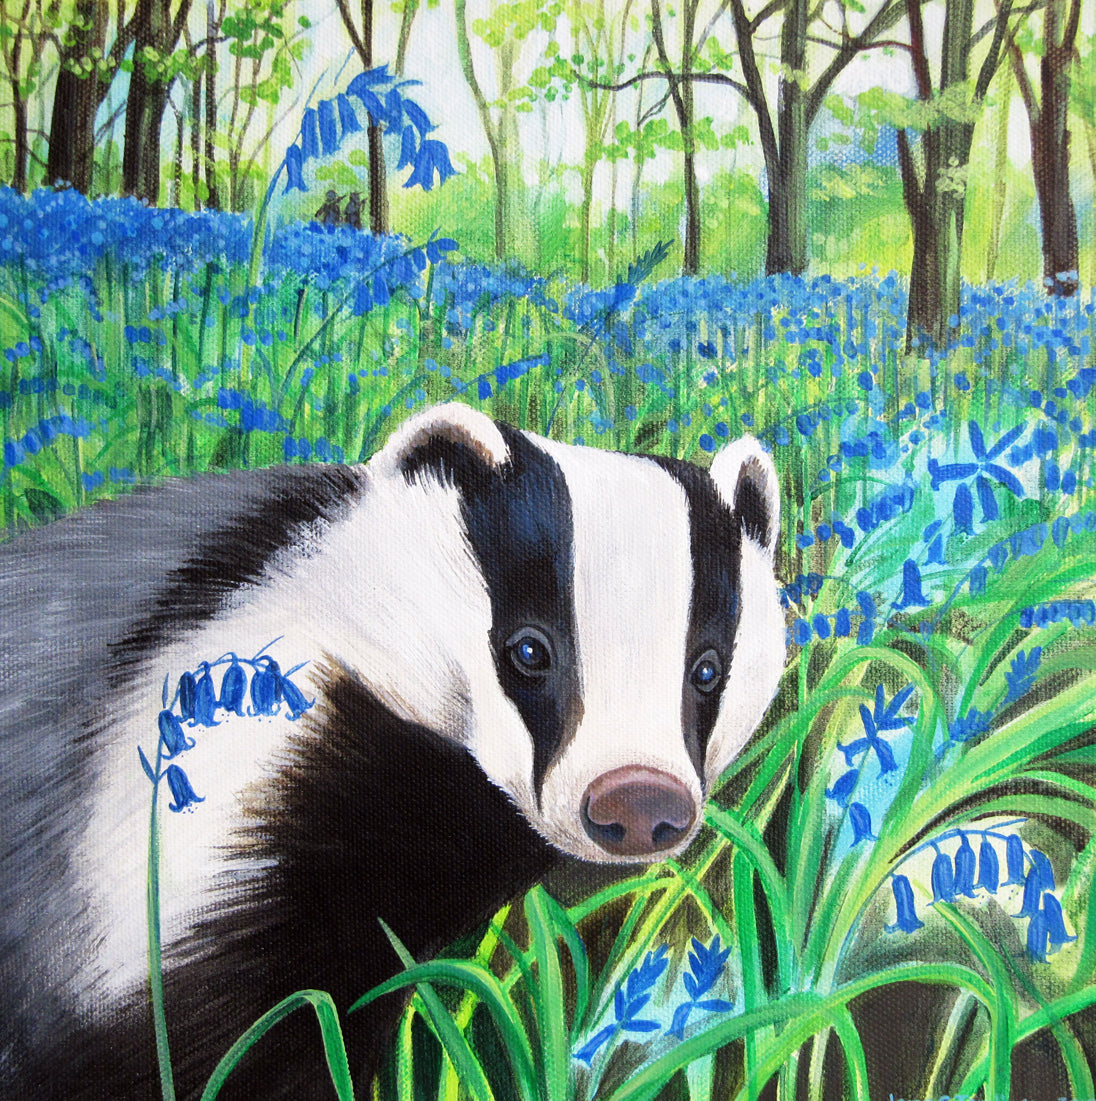 Badger greetings cards - choose from 6 designs